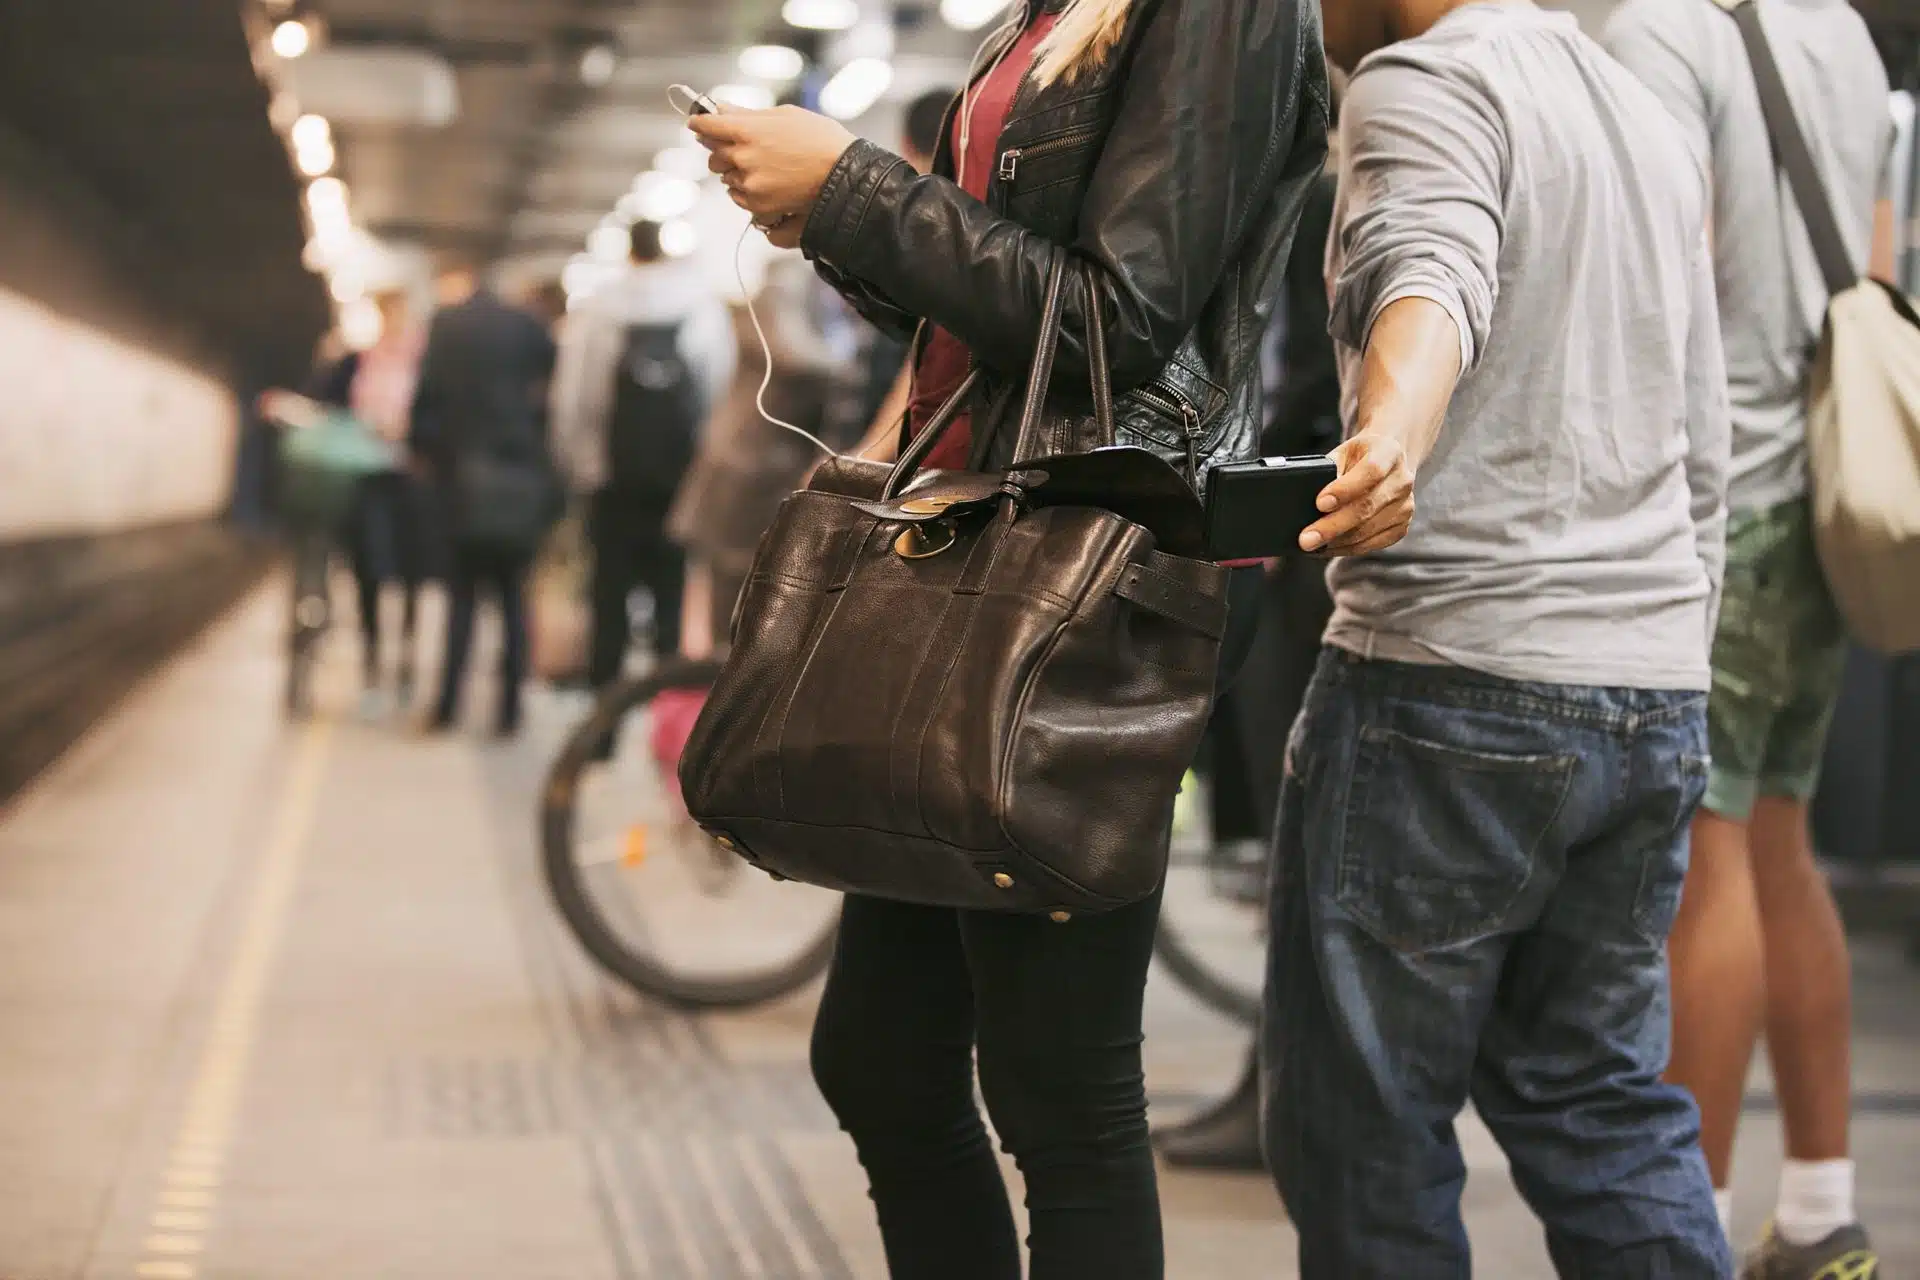 pickpocketing is a common travel scam